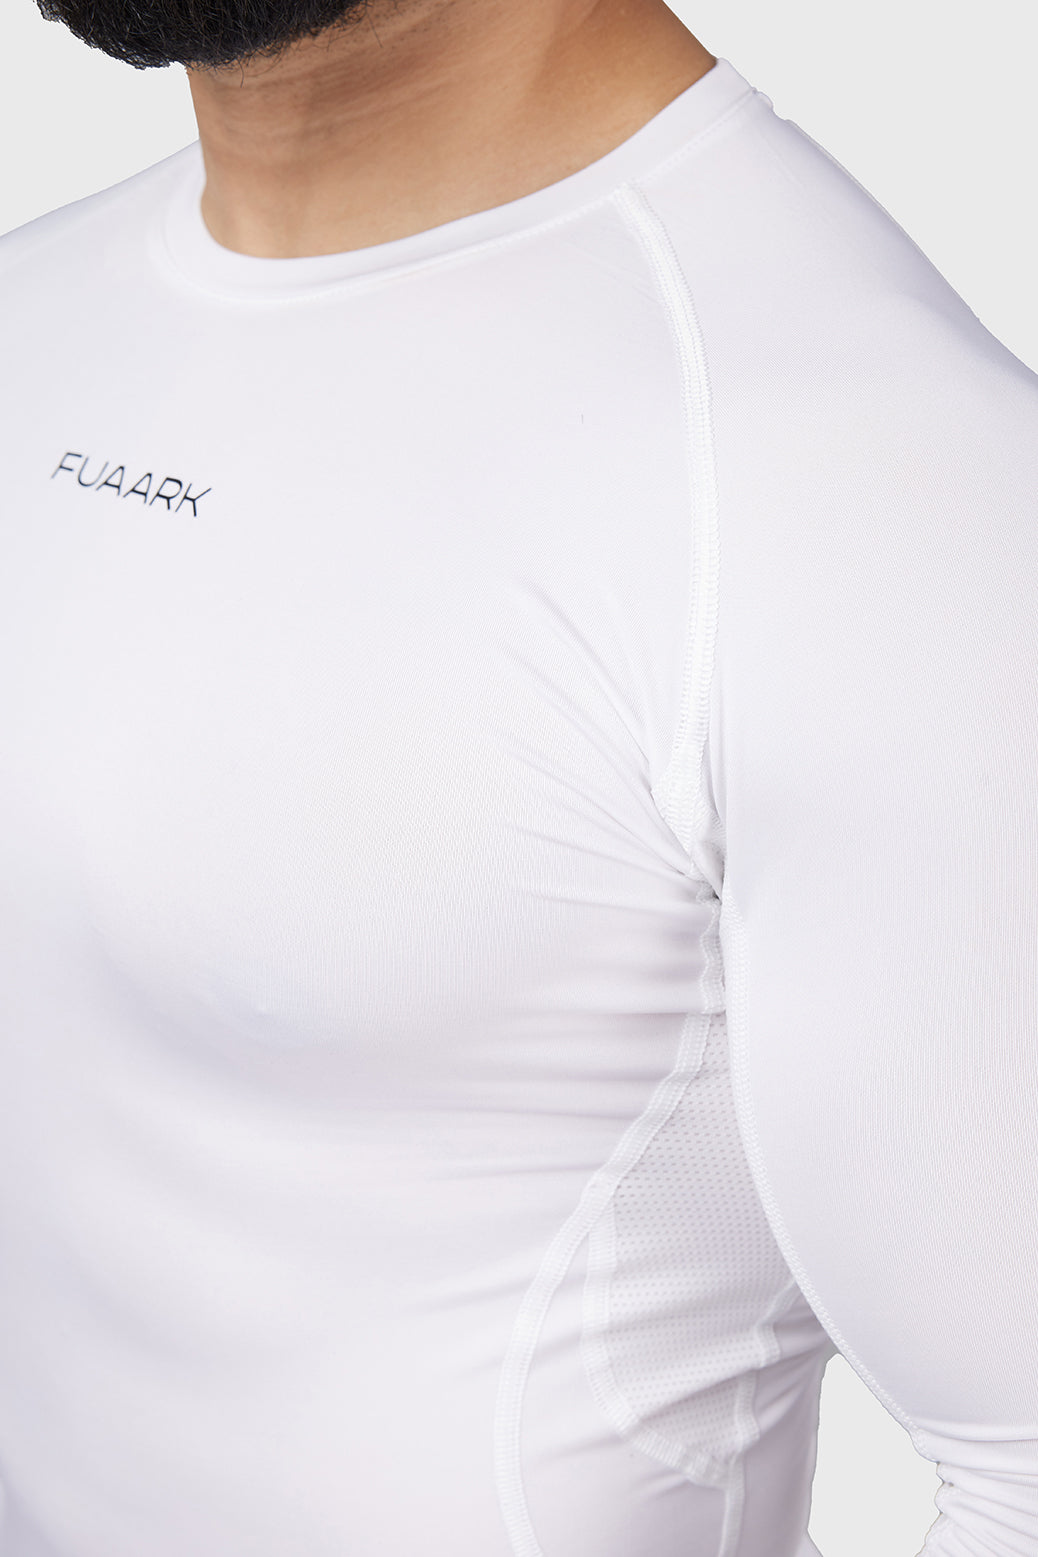 Compression 2.0 Full Sleeves T-shirt White